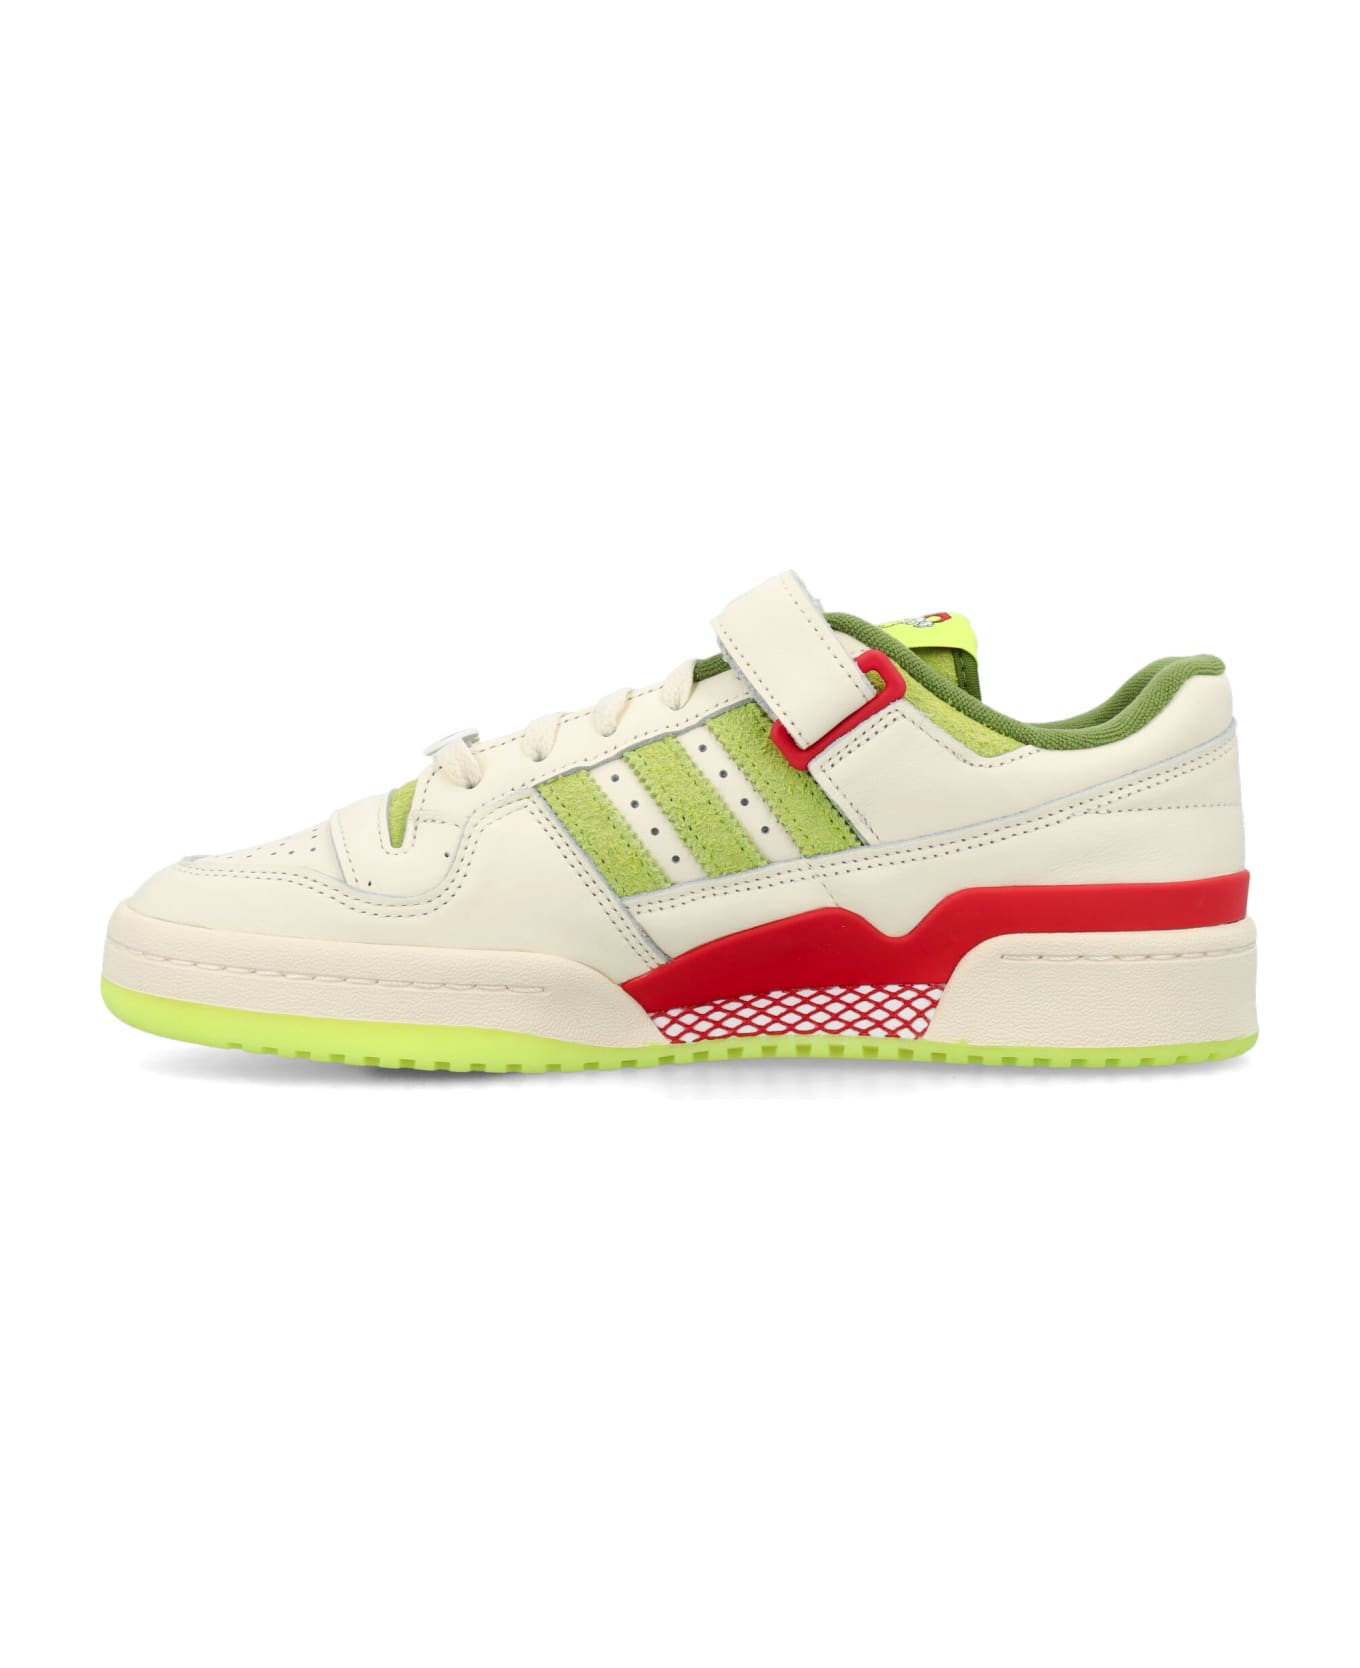 Adidas Originals Forum Low Cl The Grinch - WHITE RED GREEN